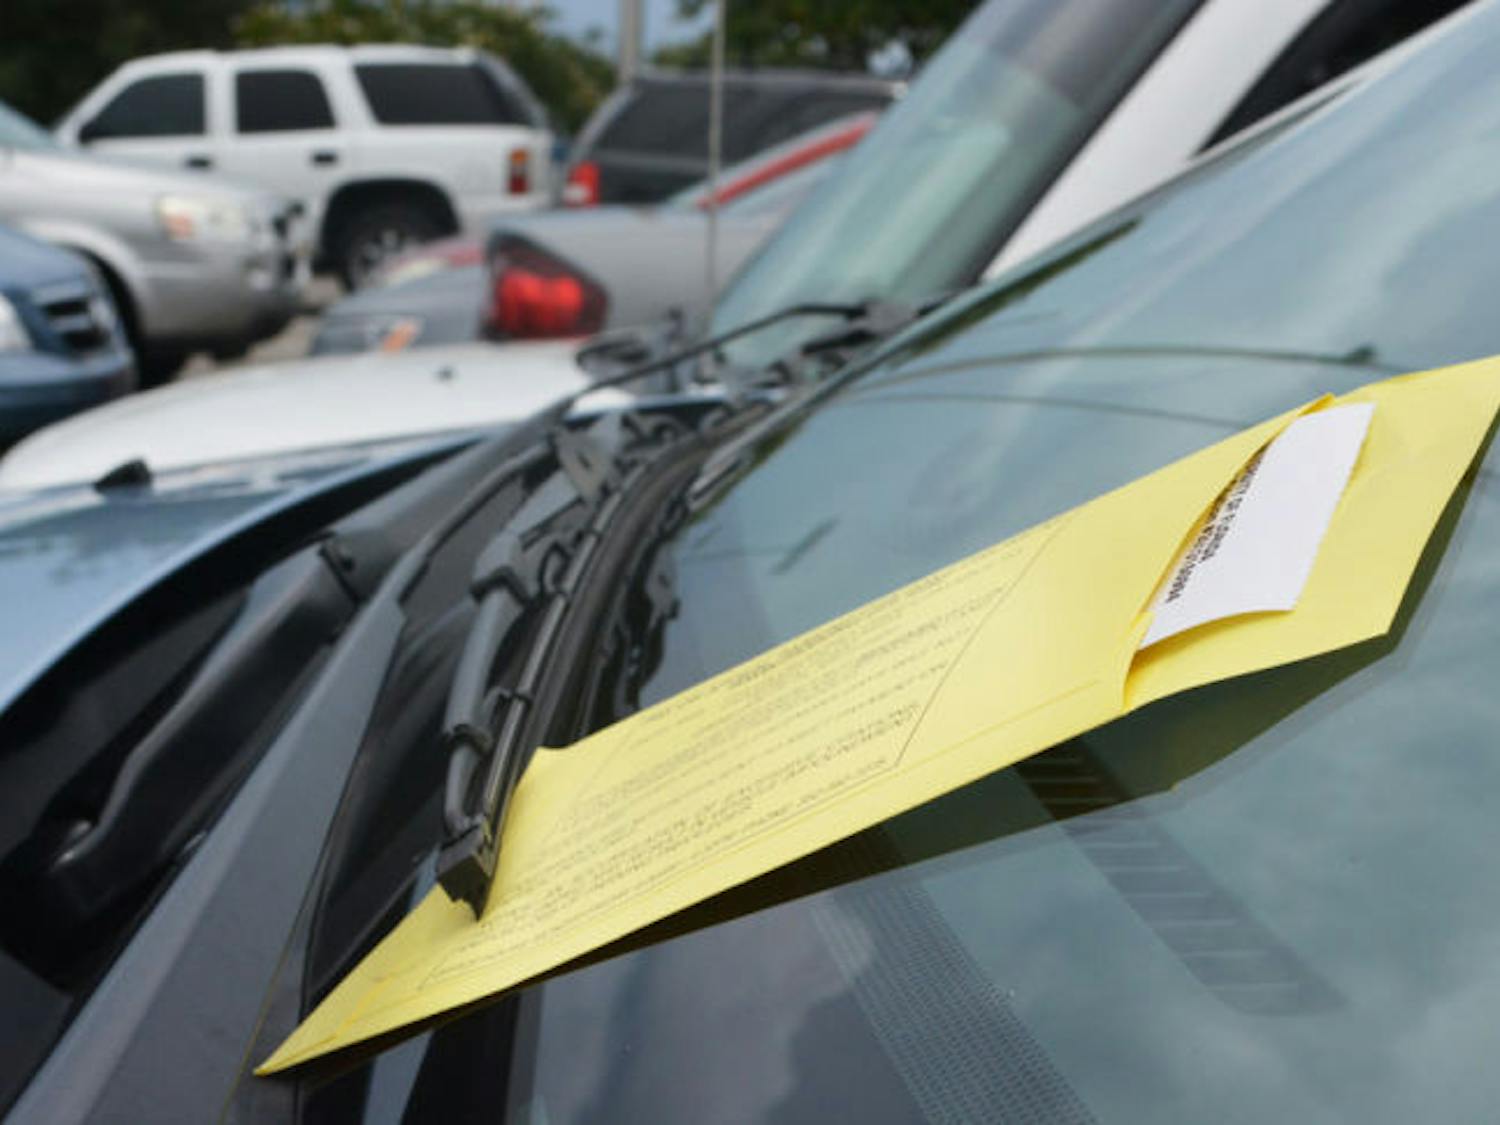 A University Police parking ticket rests on a car’s windshield Monday. The city of Gainesville is attempting to collect more than $600,000 in unpaid tickets to provide revenue that could fund additional parking areas.
&nbsp;